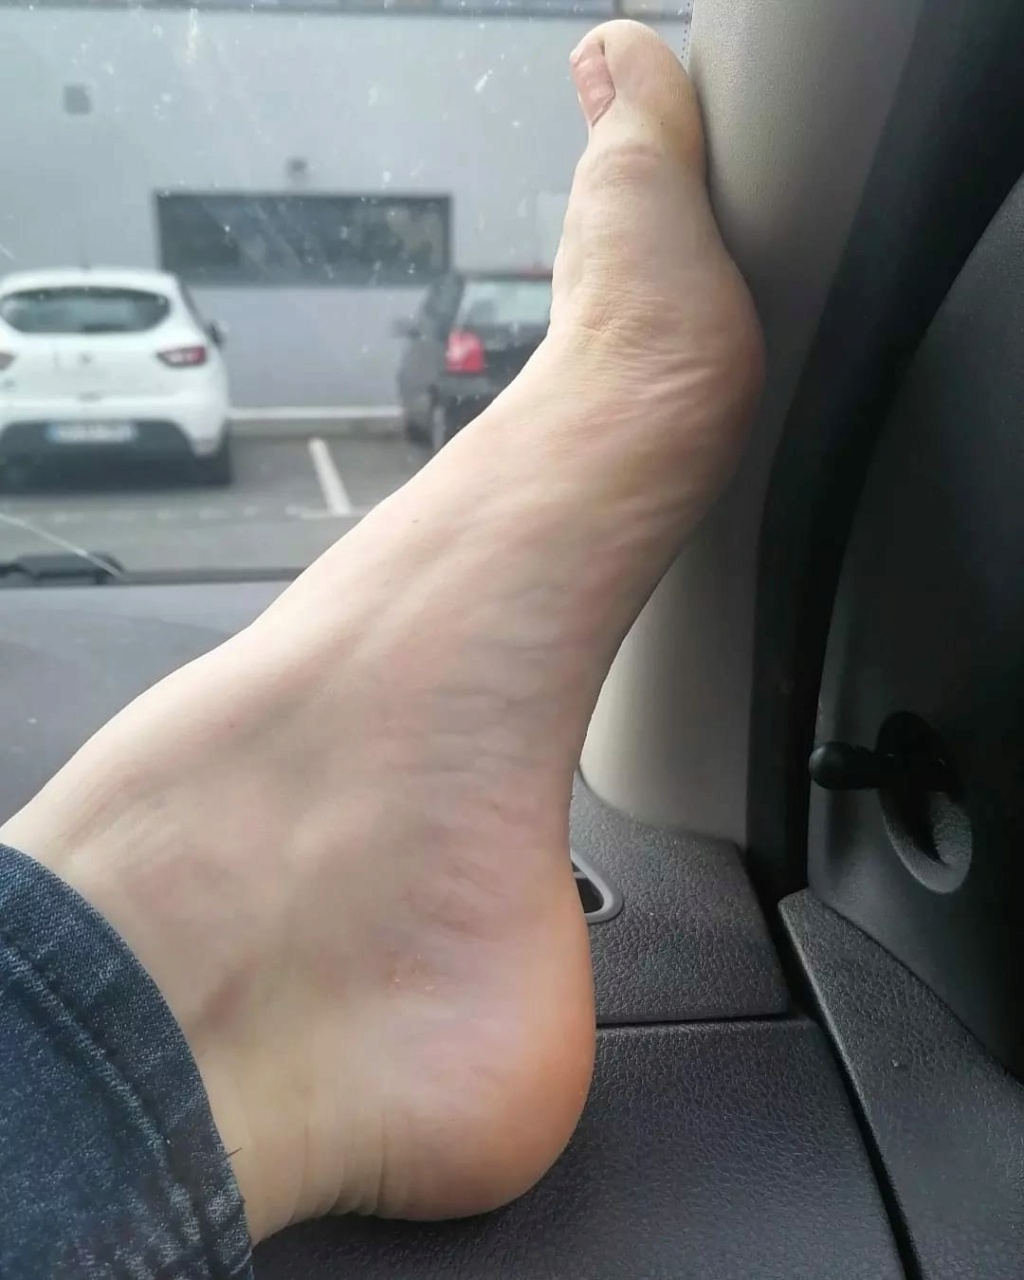 Pieds en voiture - Page 2 Img-2017